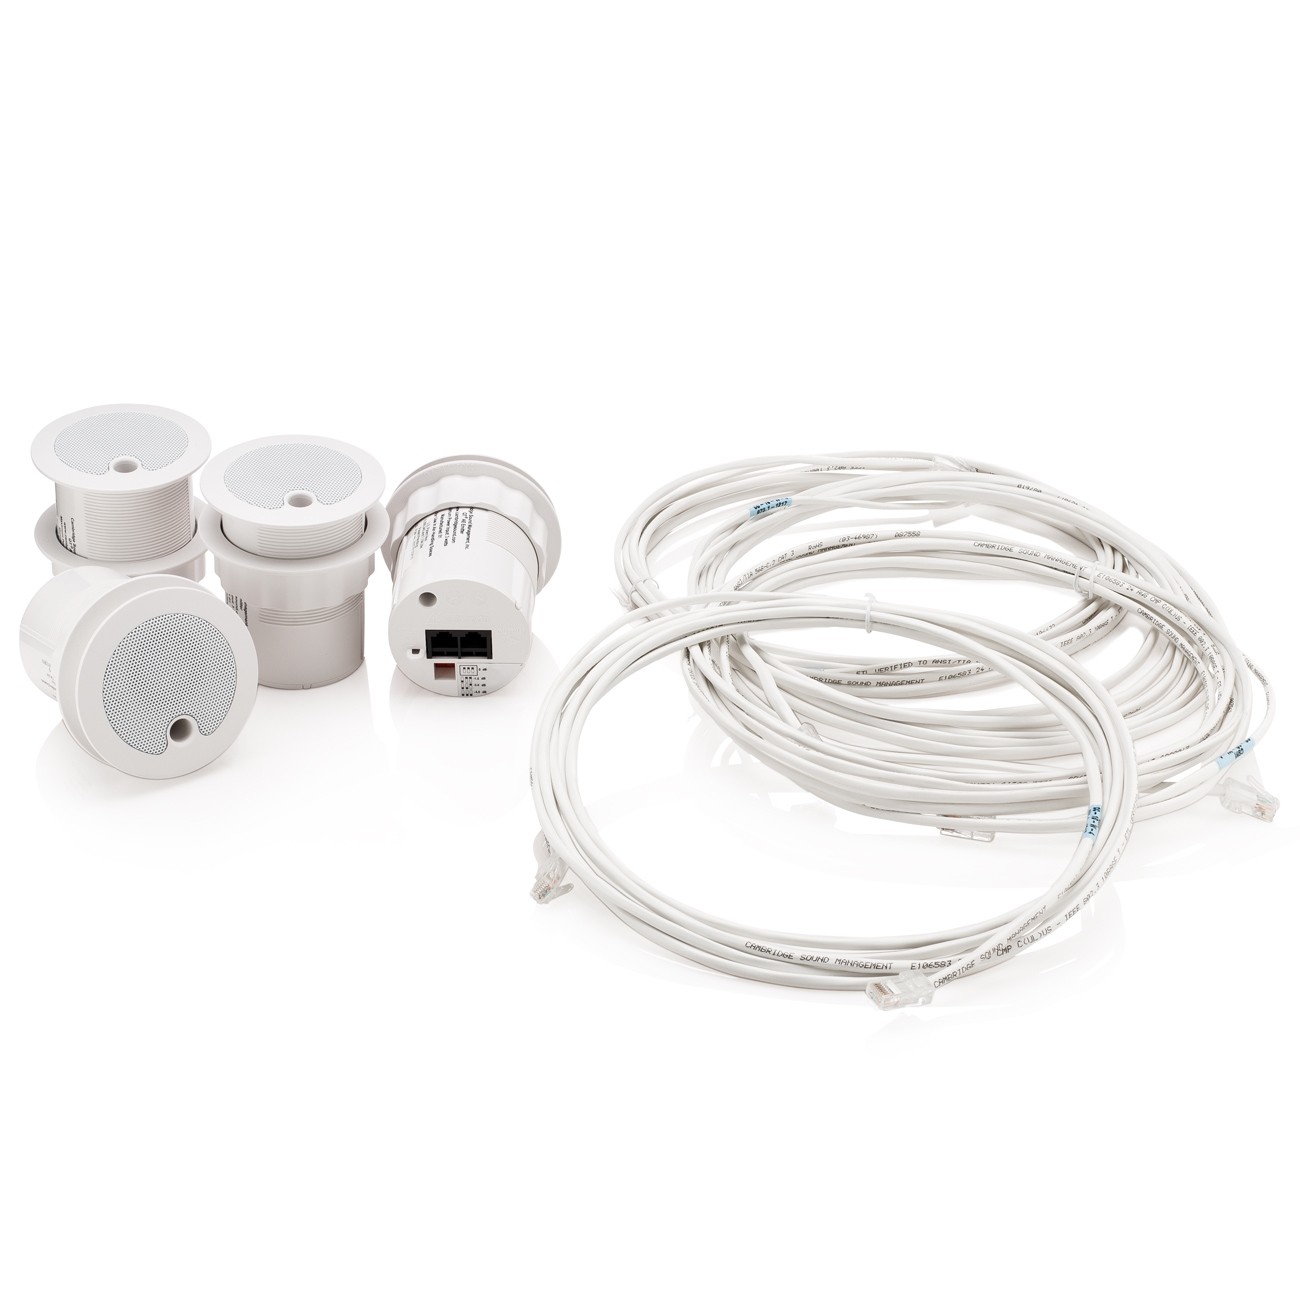 Cambridge Qt Active Emitter Speakers with Cables